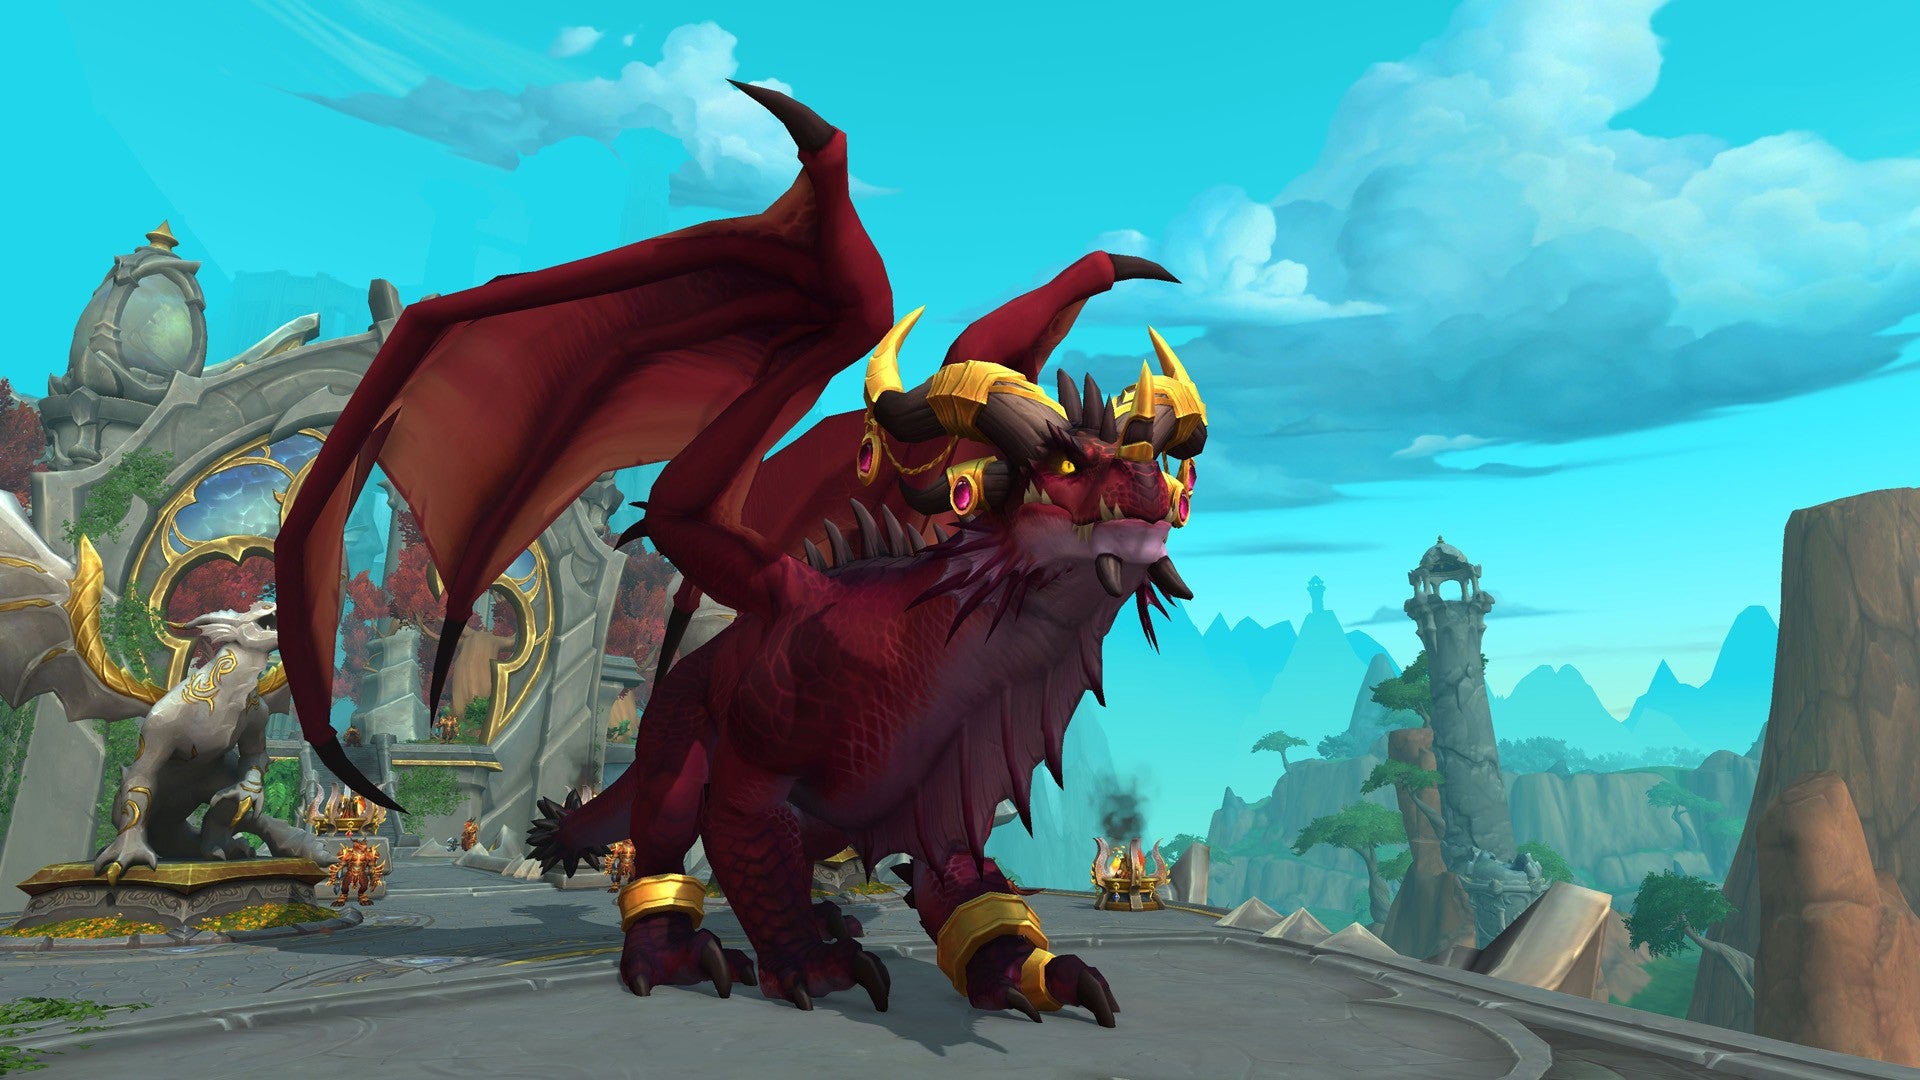 World of Warcraft's next expansion is Dragonflight, has plenty of 